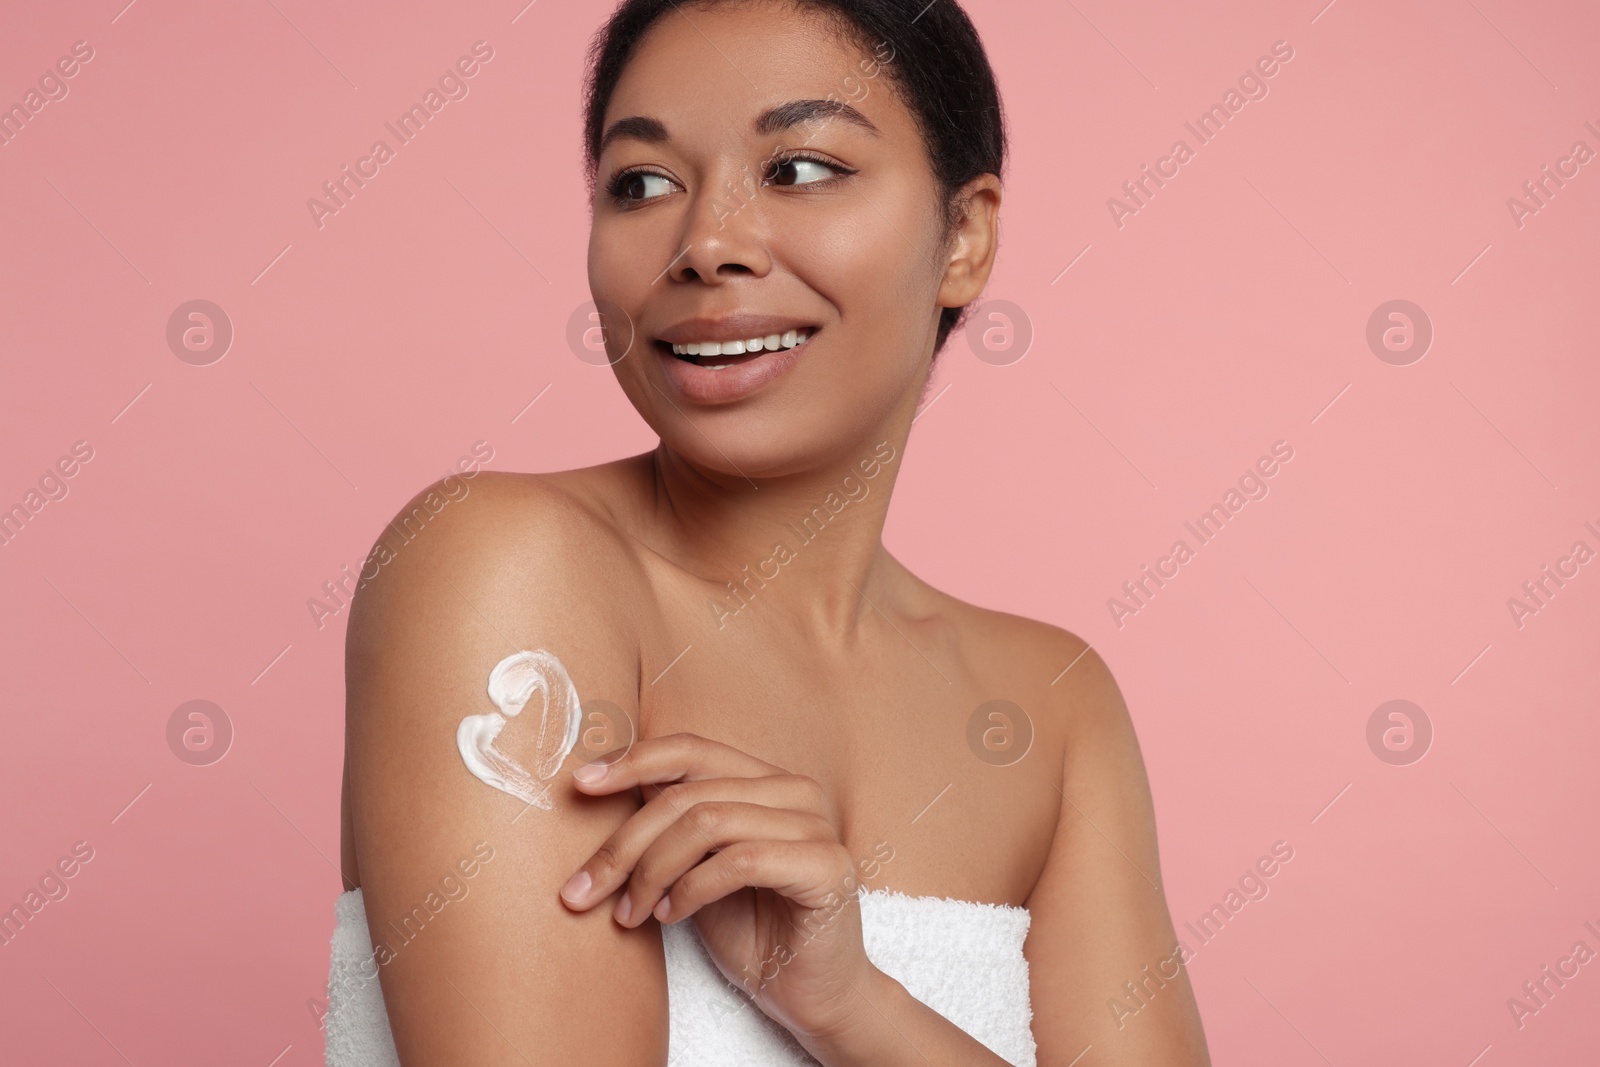 Photo of Young woman applying body cream onto arm on pink background